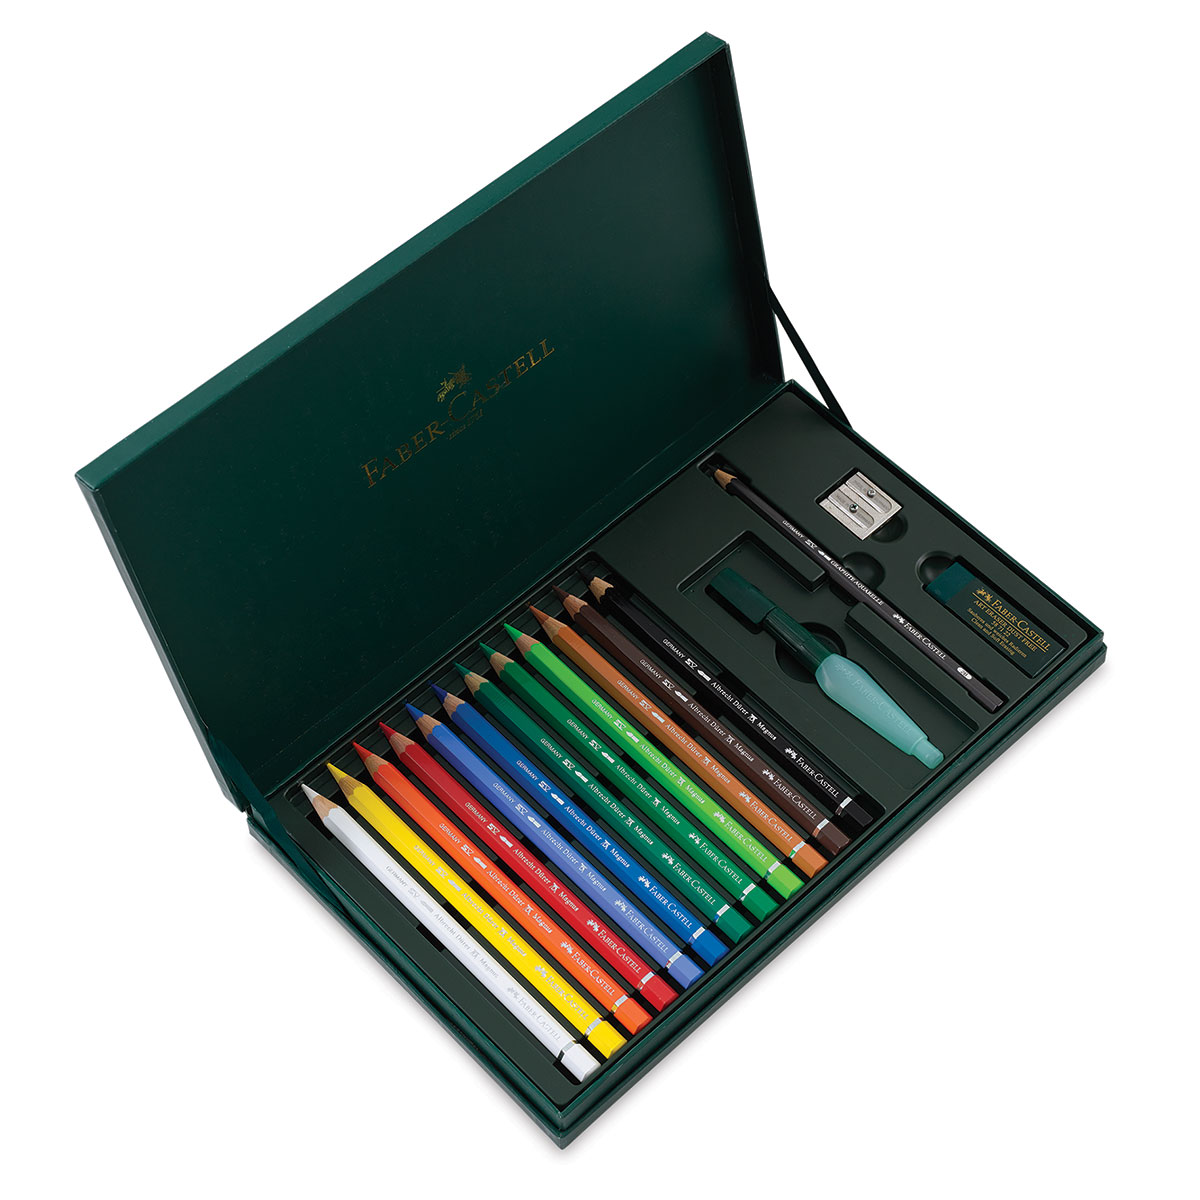 Set Of 30 Different Colours in a Wenge Stained Wooden Gift or Collectors Box With 4 Accessories Including 4B Graphite Aquarelle Jumbo Double Sharpener Faber-Castell Albrecht Dürer Magnus Watercolour Pencils Watercolour Brush and Eraser 